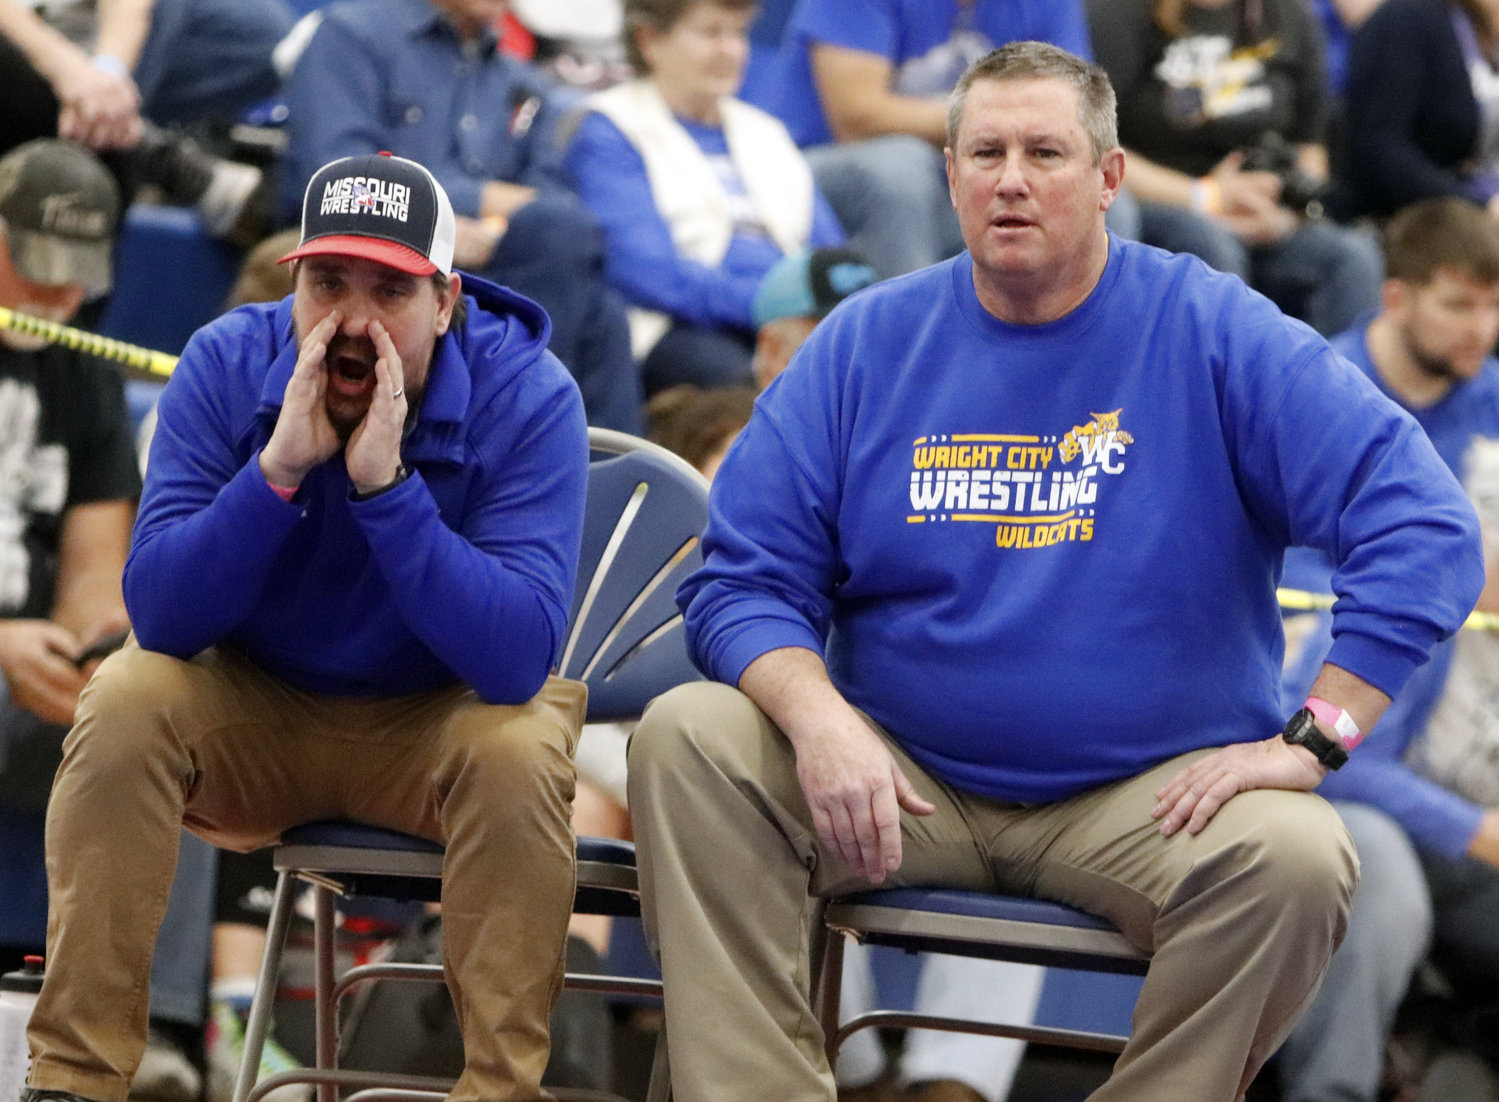 Wright City wrestling coaches look on during Saturday's district wrestling tournament.